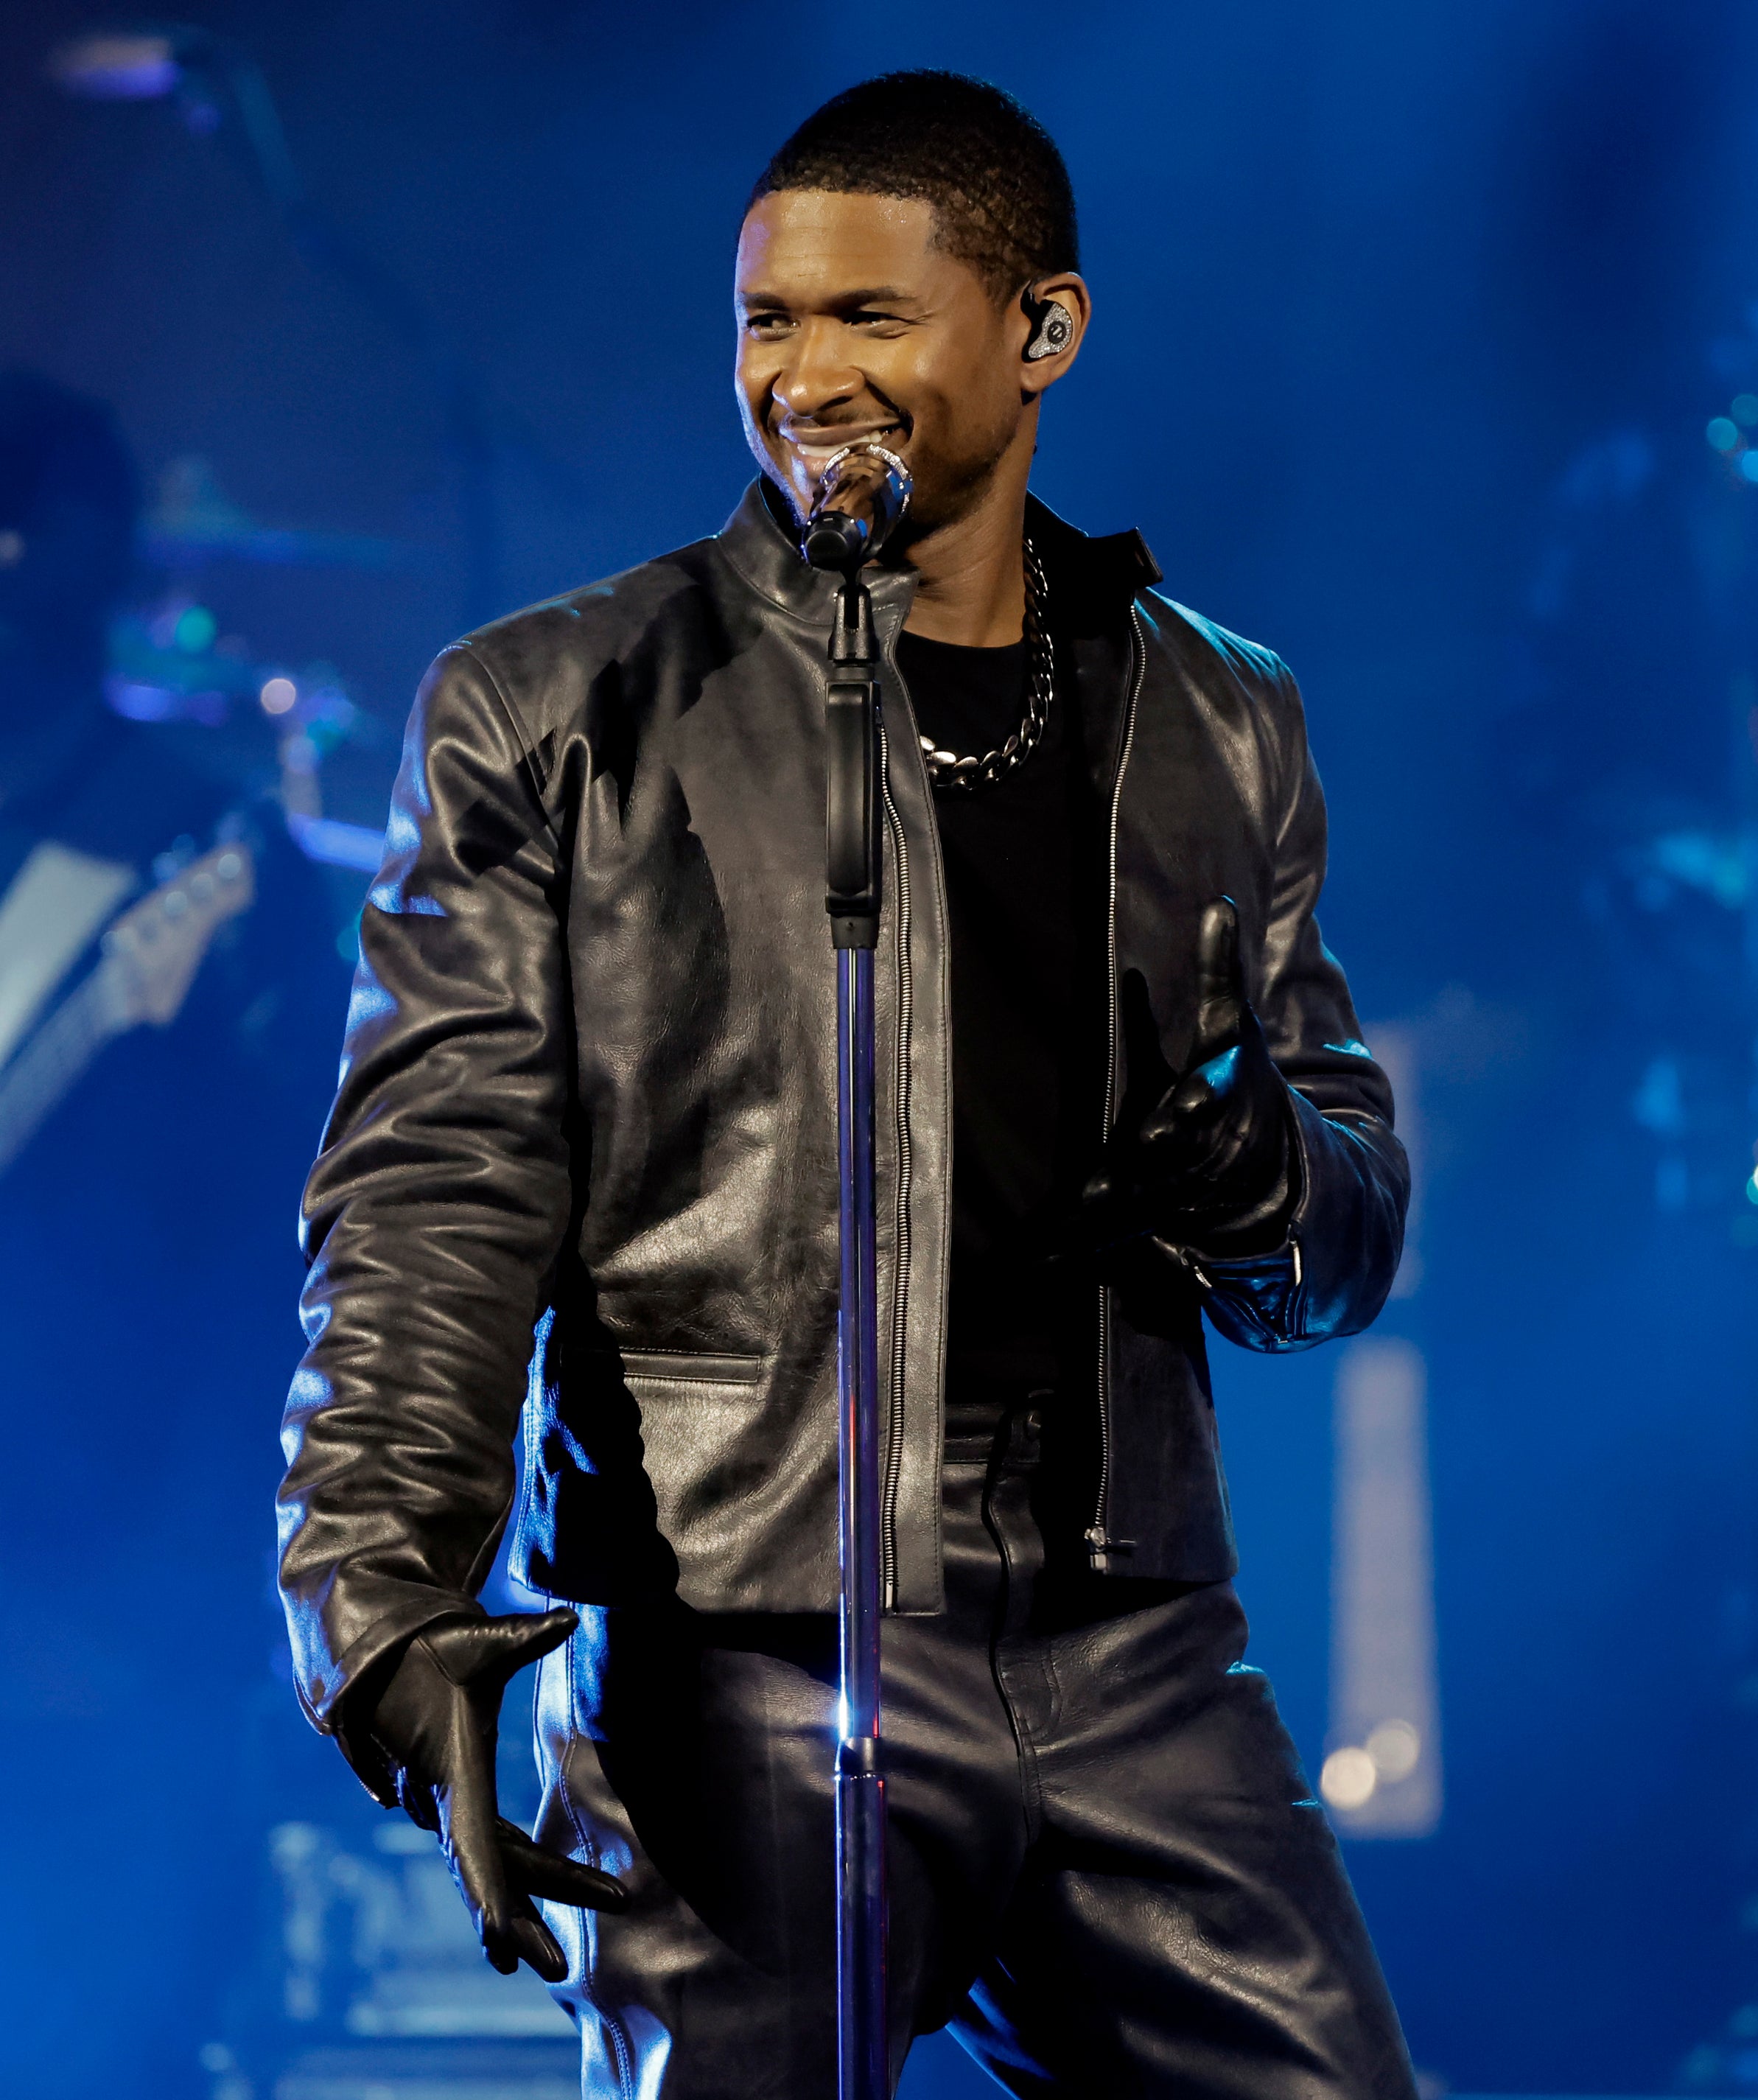 Usher smiles as he performs on stage